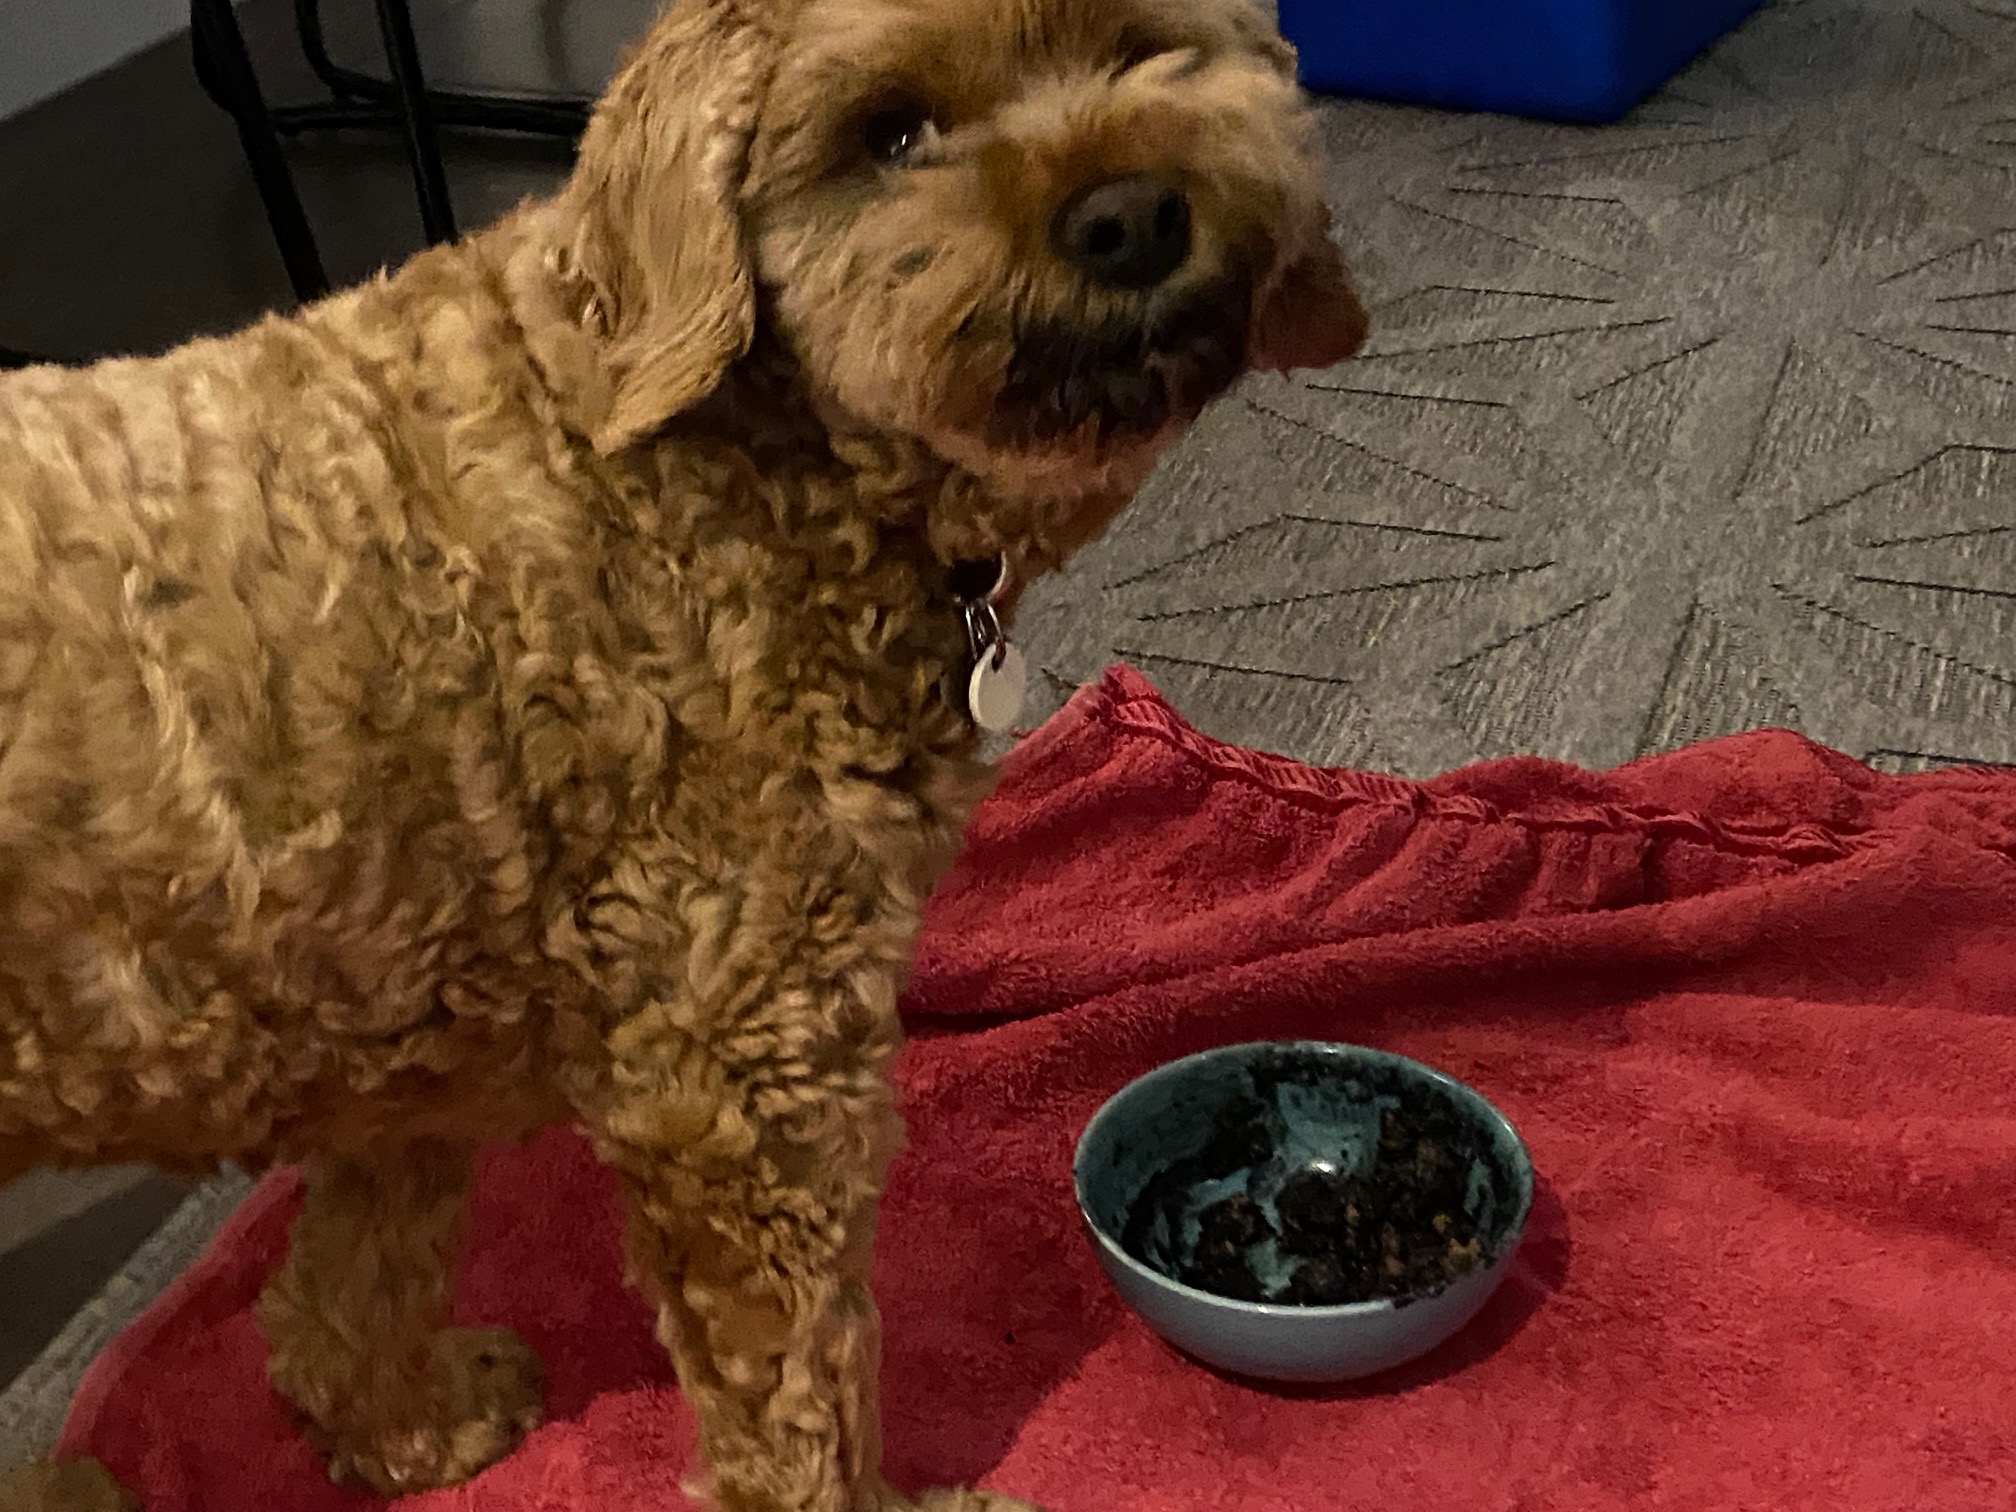 Hubert the Cavoodle has food in his bowl that is chunky and black. He is turning back cheekily to look at you with his entire mouth and chin covered in black food too.